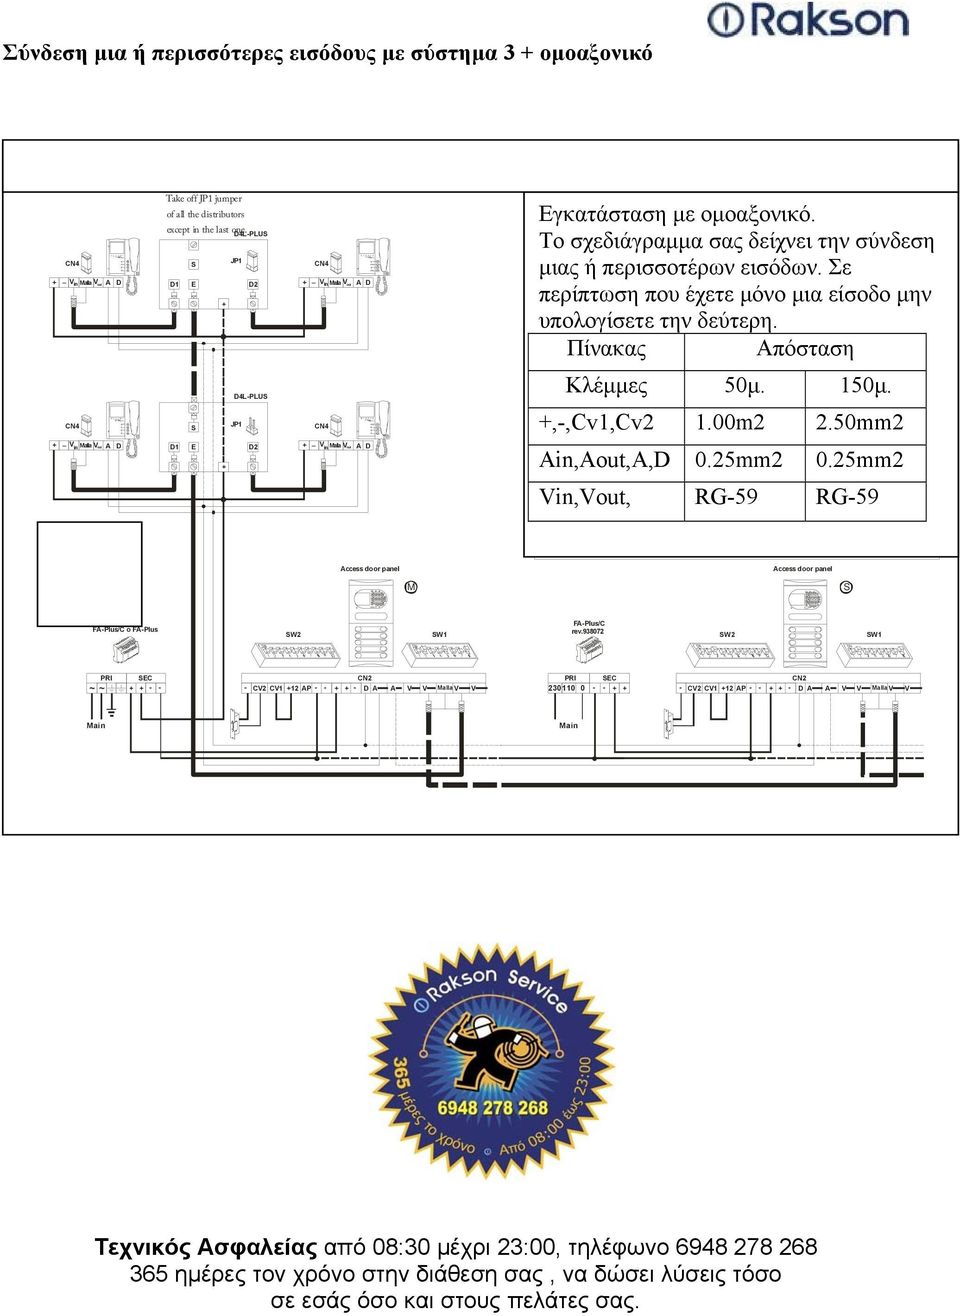 video Το σχεδιάγραμμα σας δείχνει την σύνδεση The installation diagram shows the connection of a video system with one or several door panels for μιας the same ή building. περισσοτέρων εισόδων.